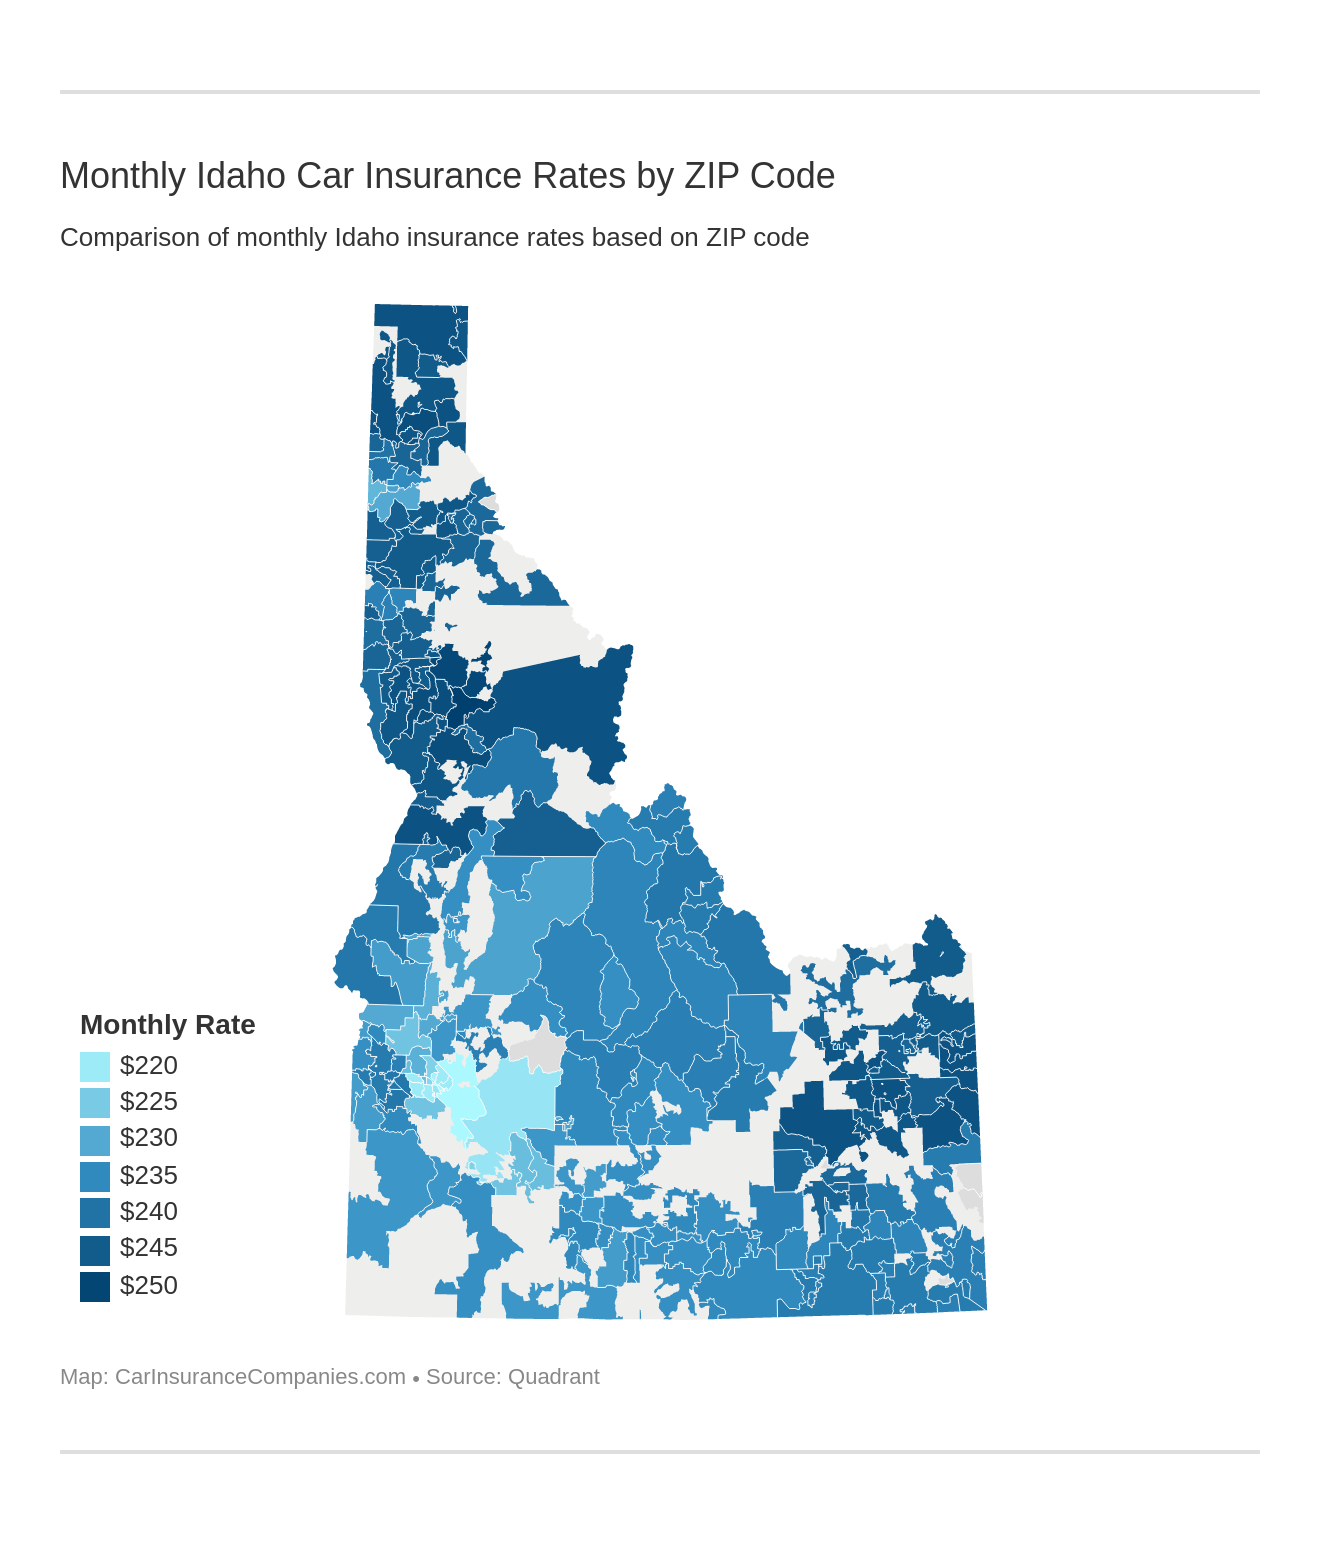 Monthly Idaho Car Insurance Rates by ZIP Code